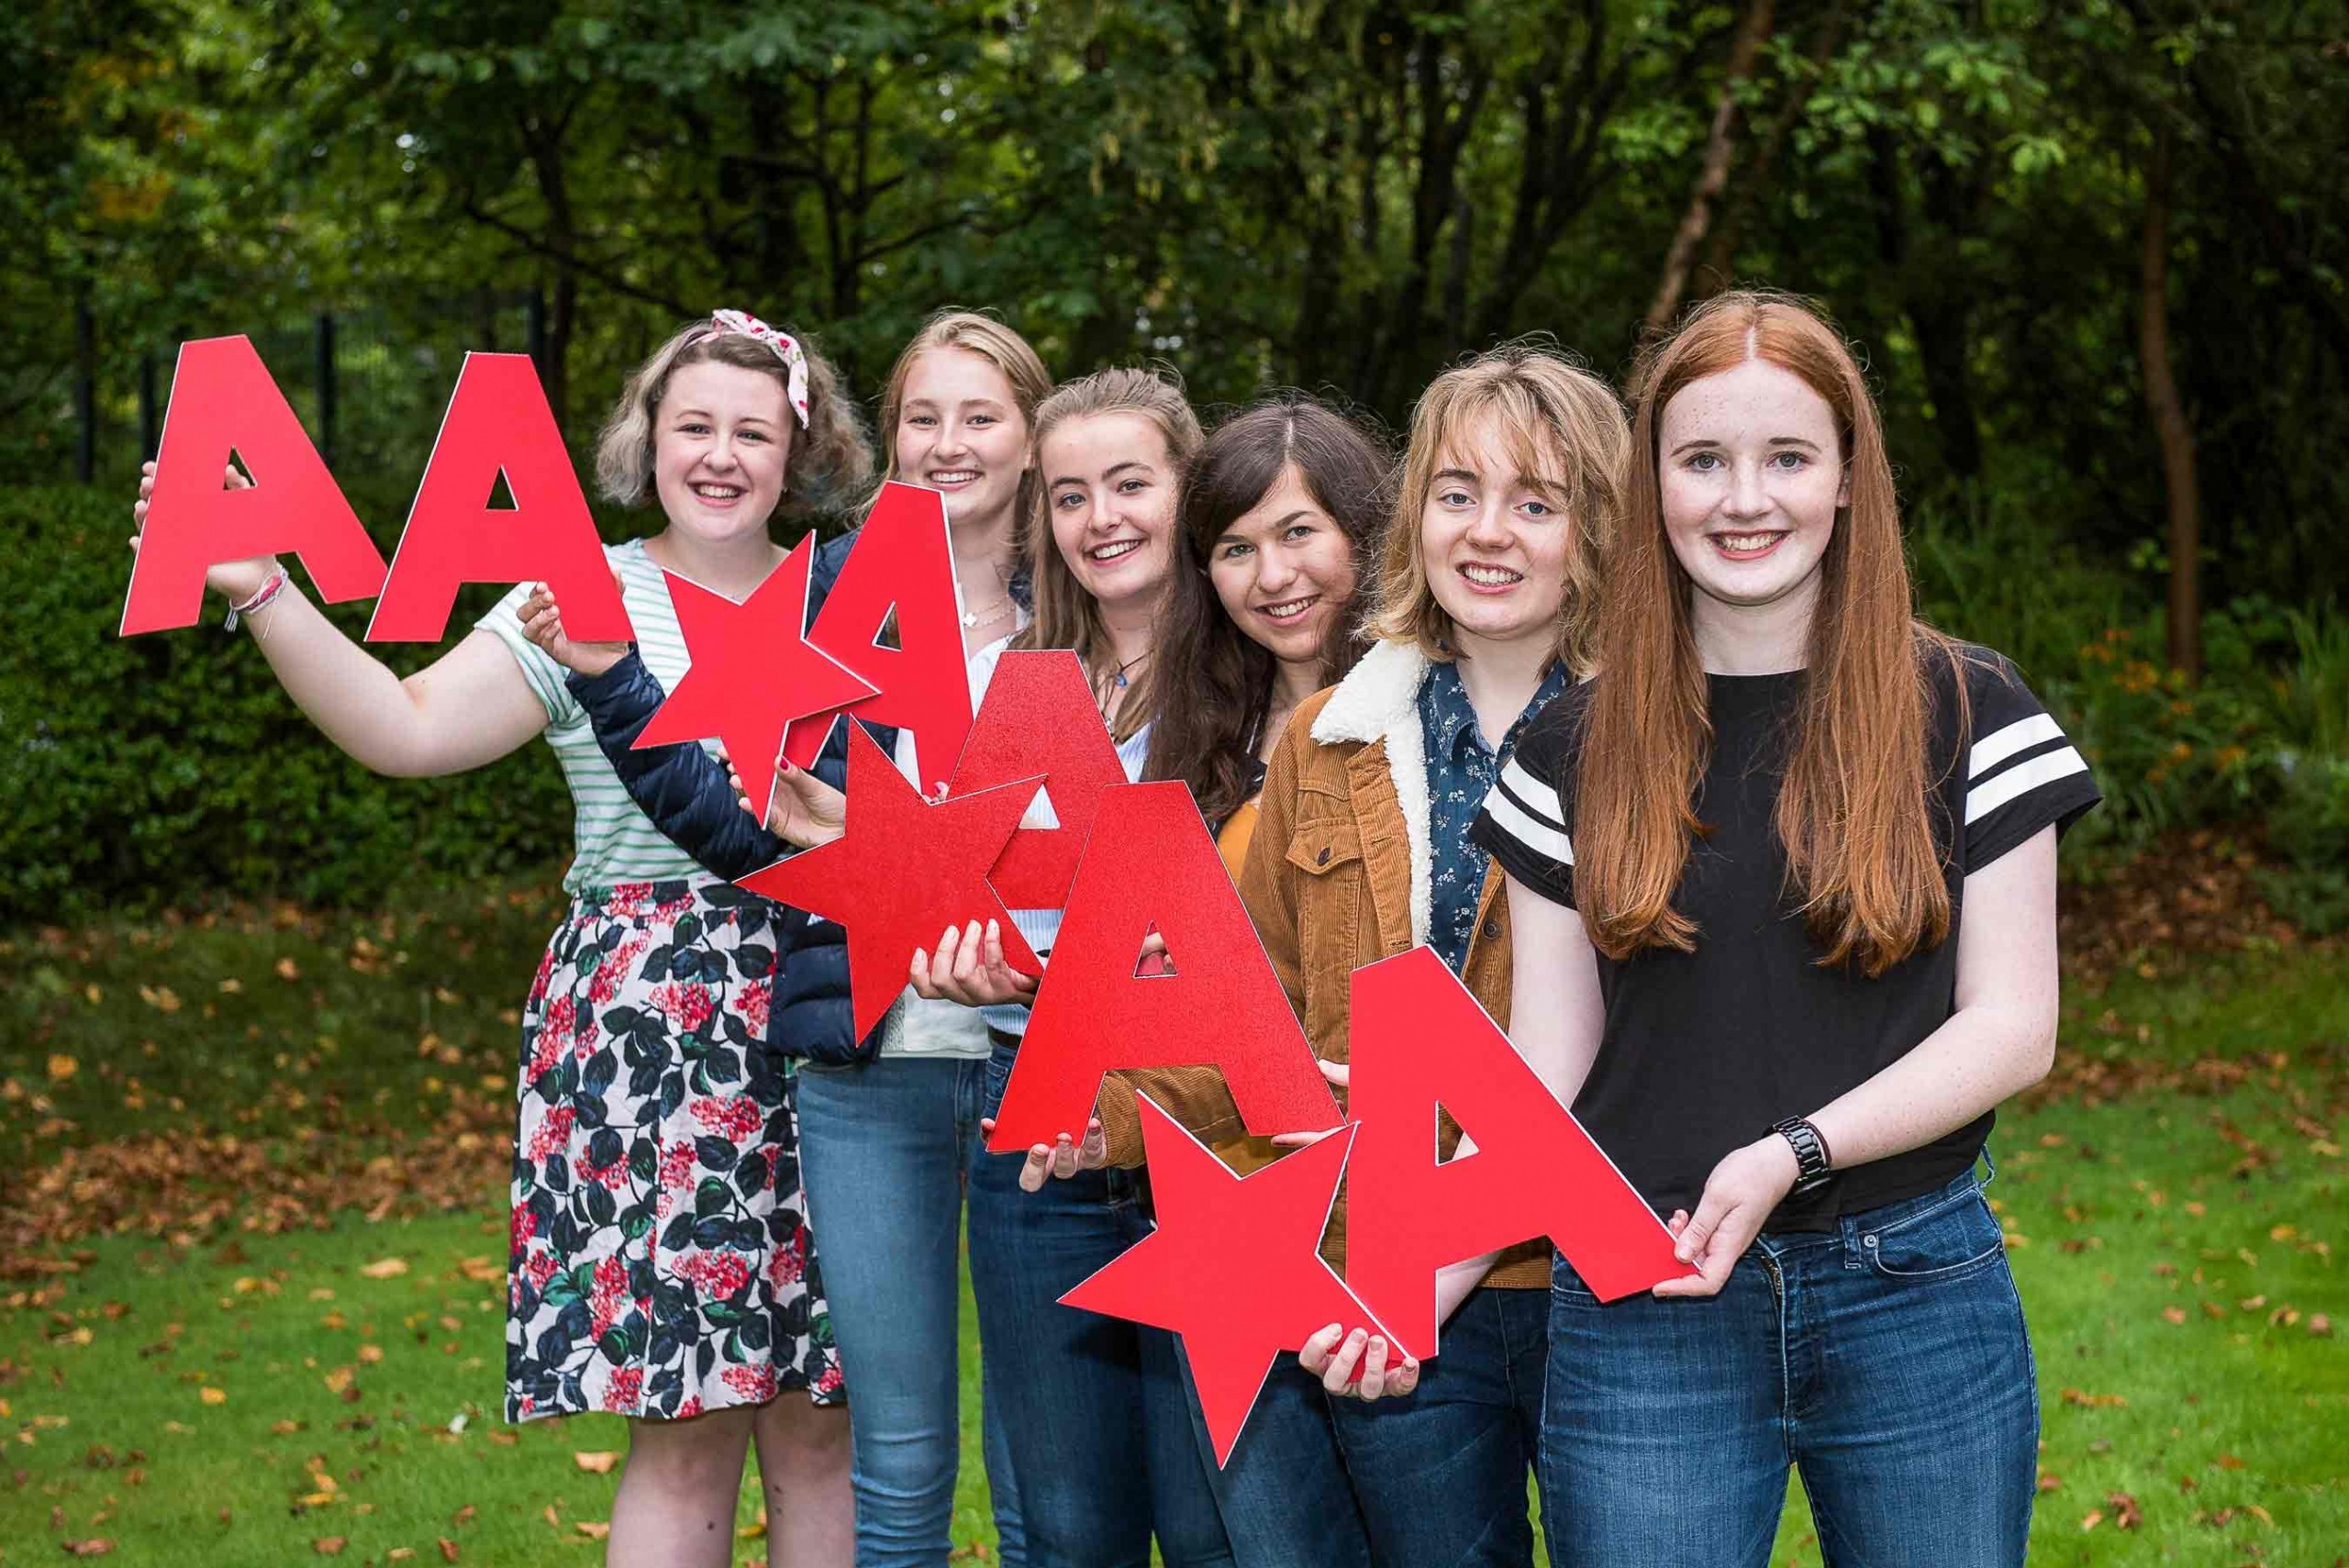 Harrogate Ladies’ College pupils celebrate an outstanding set of GCSE results.